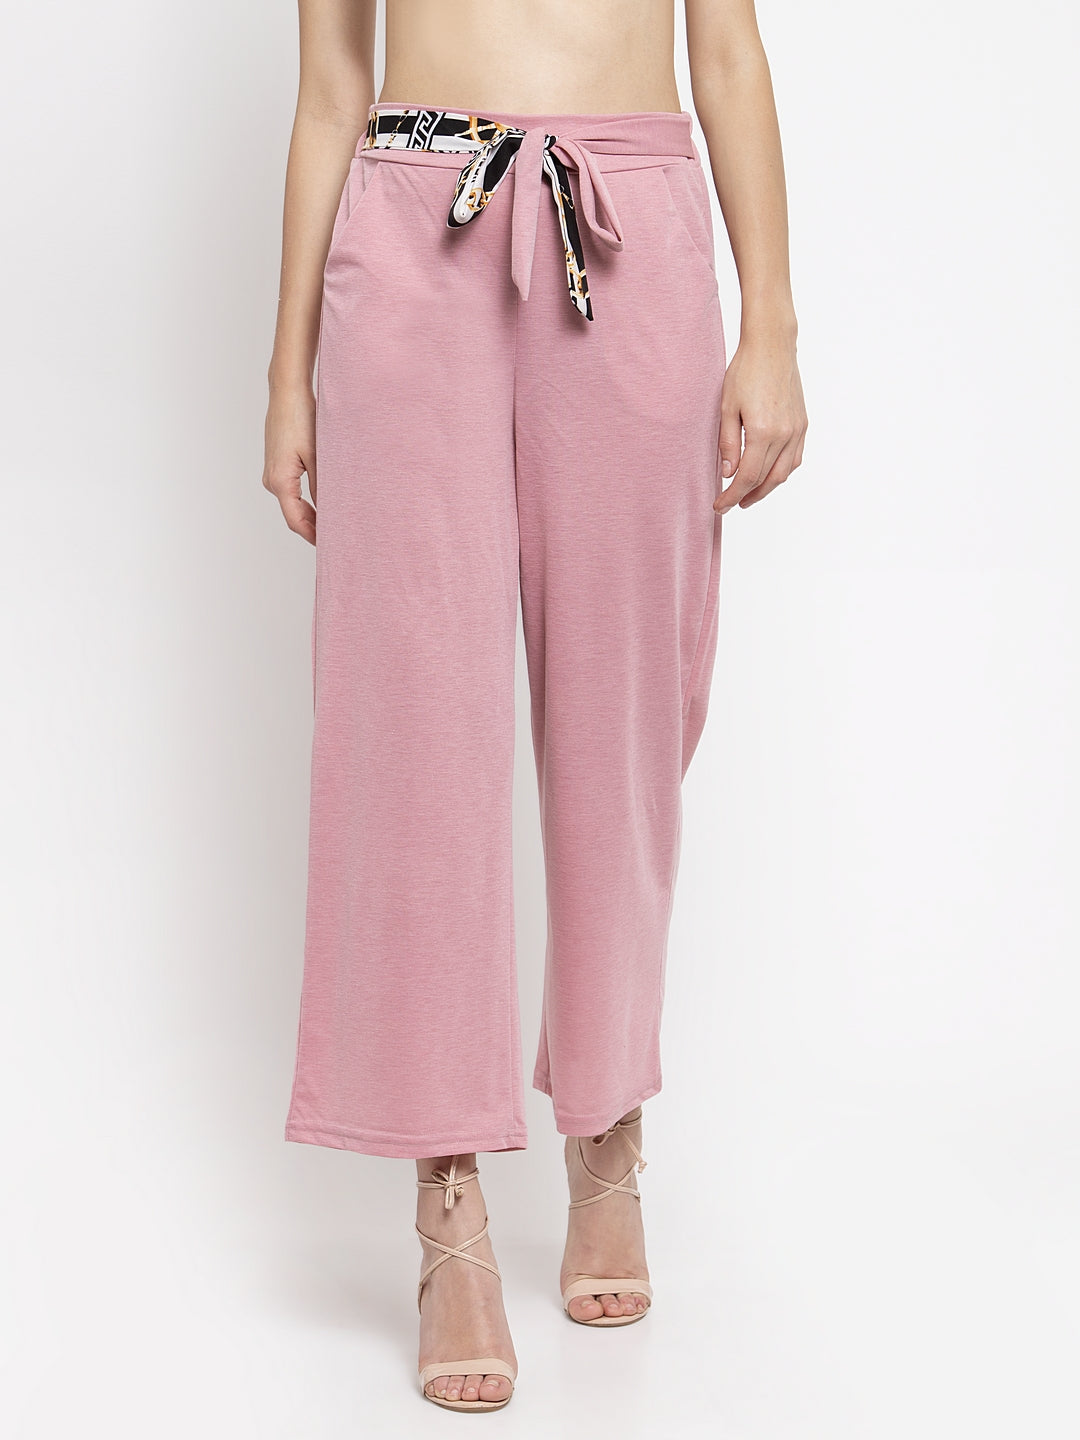 Solid Pink Plazo With Scarf Belt